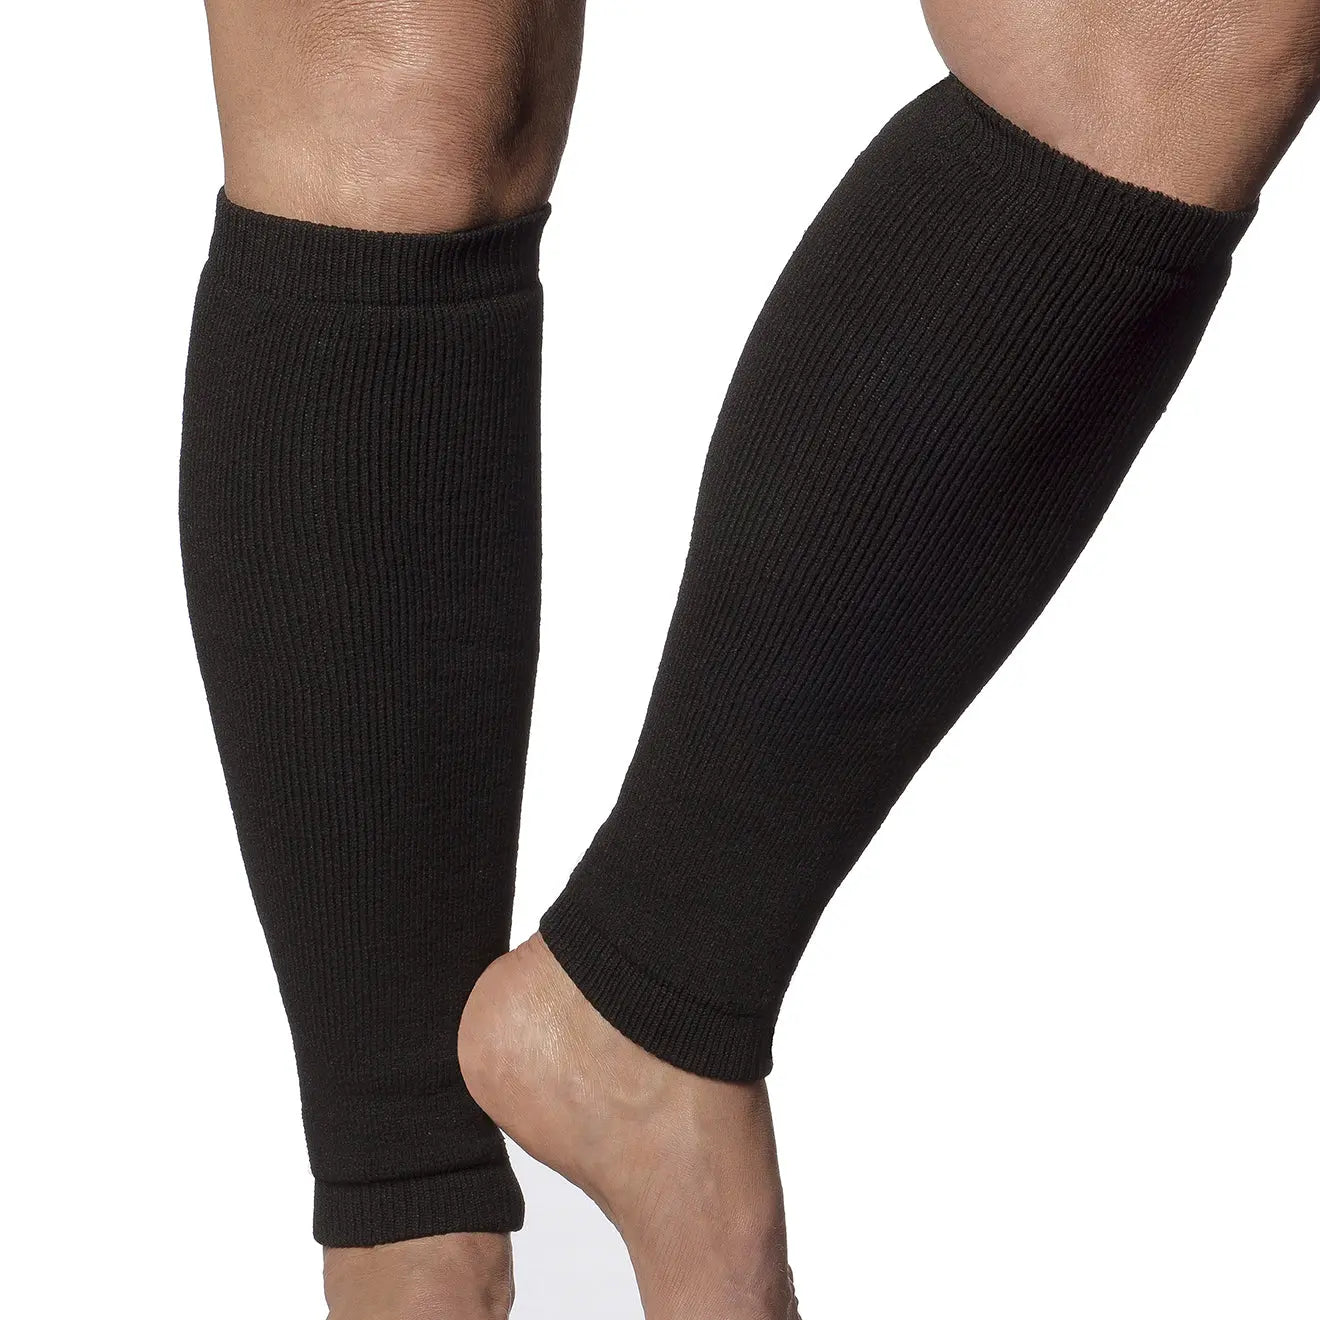 Leg Sleeves - Light Weight. Frail Skin Protectors. Protection From Leg Damage Black